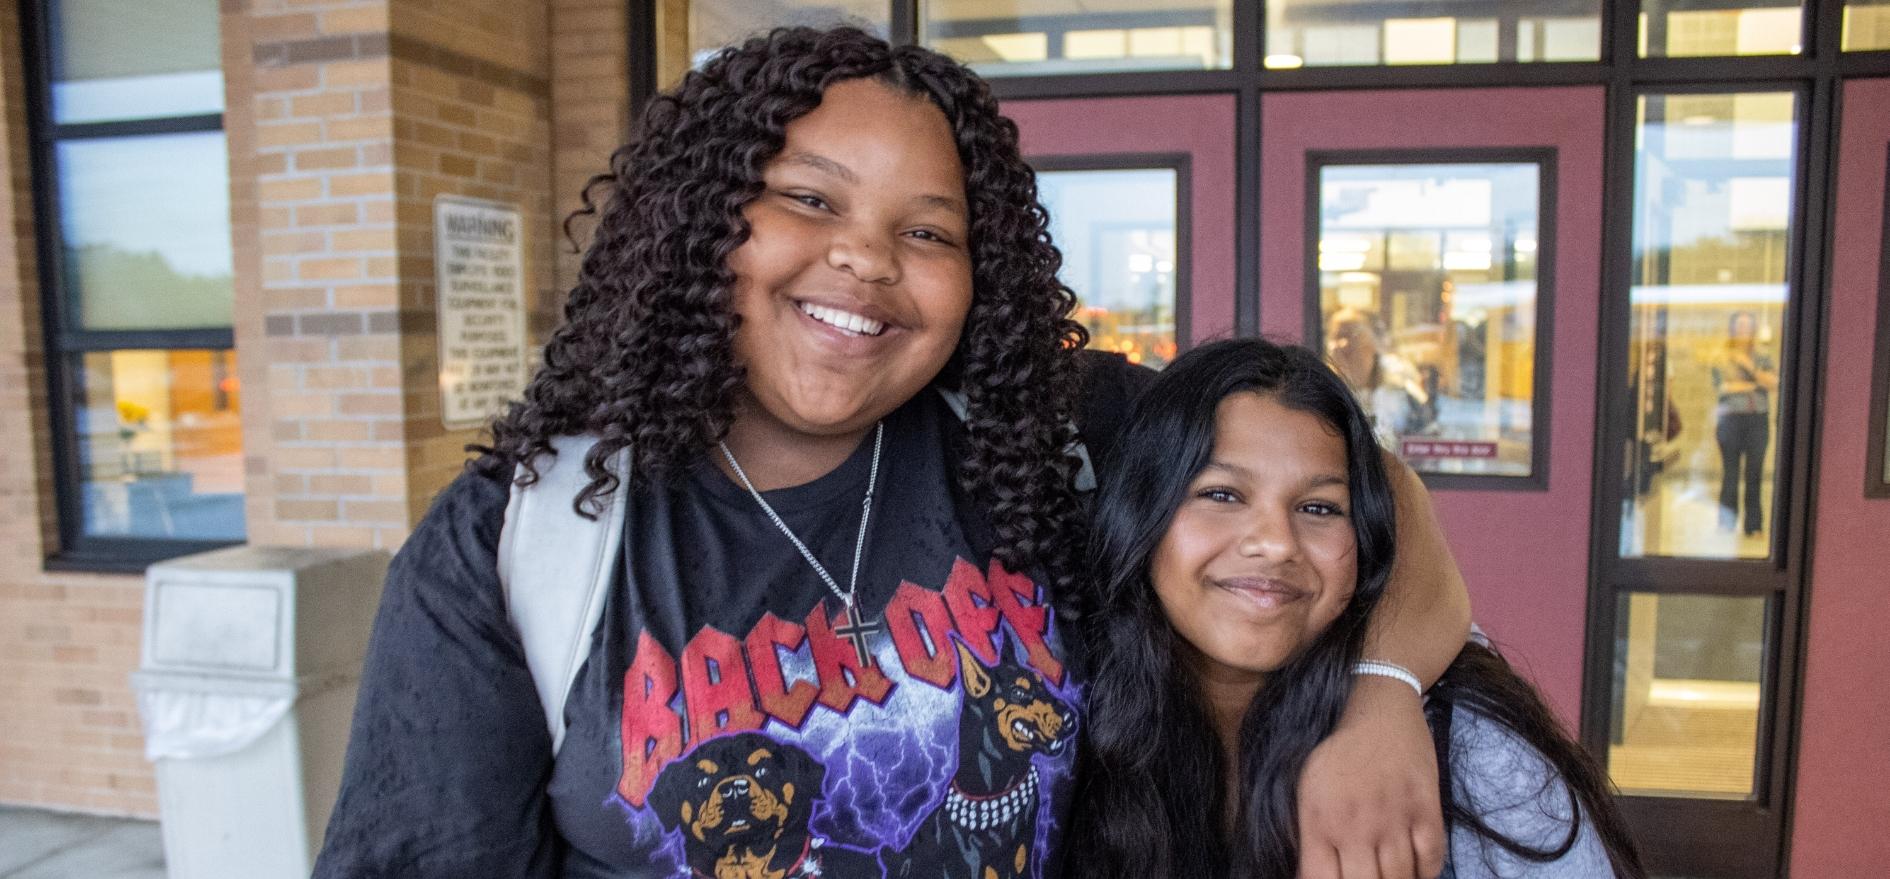 Two students with their arms around each other in front of high school entrance, smiling for a picture on the first day of school